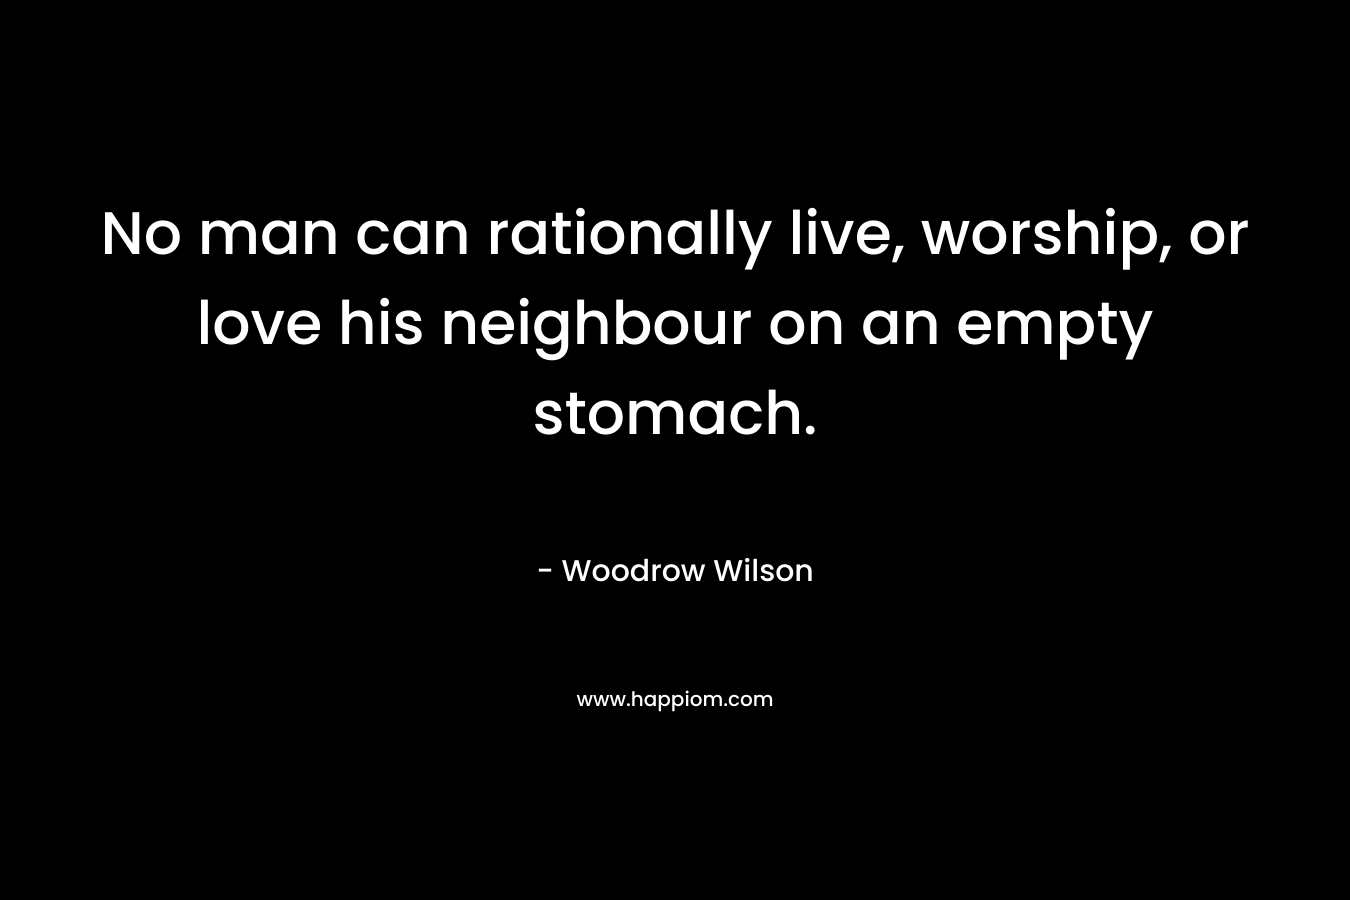 No man can rationally live, worship, or love his neighbour on an empty stomach. – Woodrow Wilson